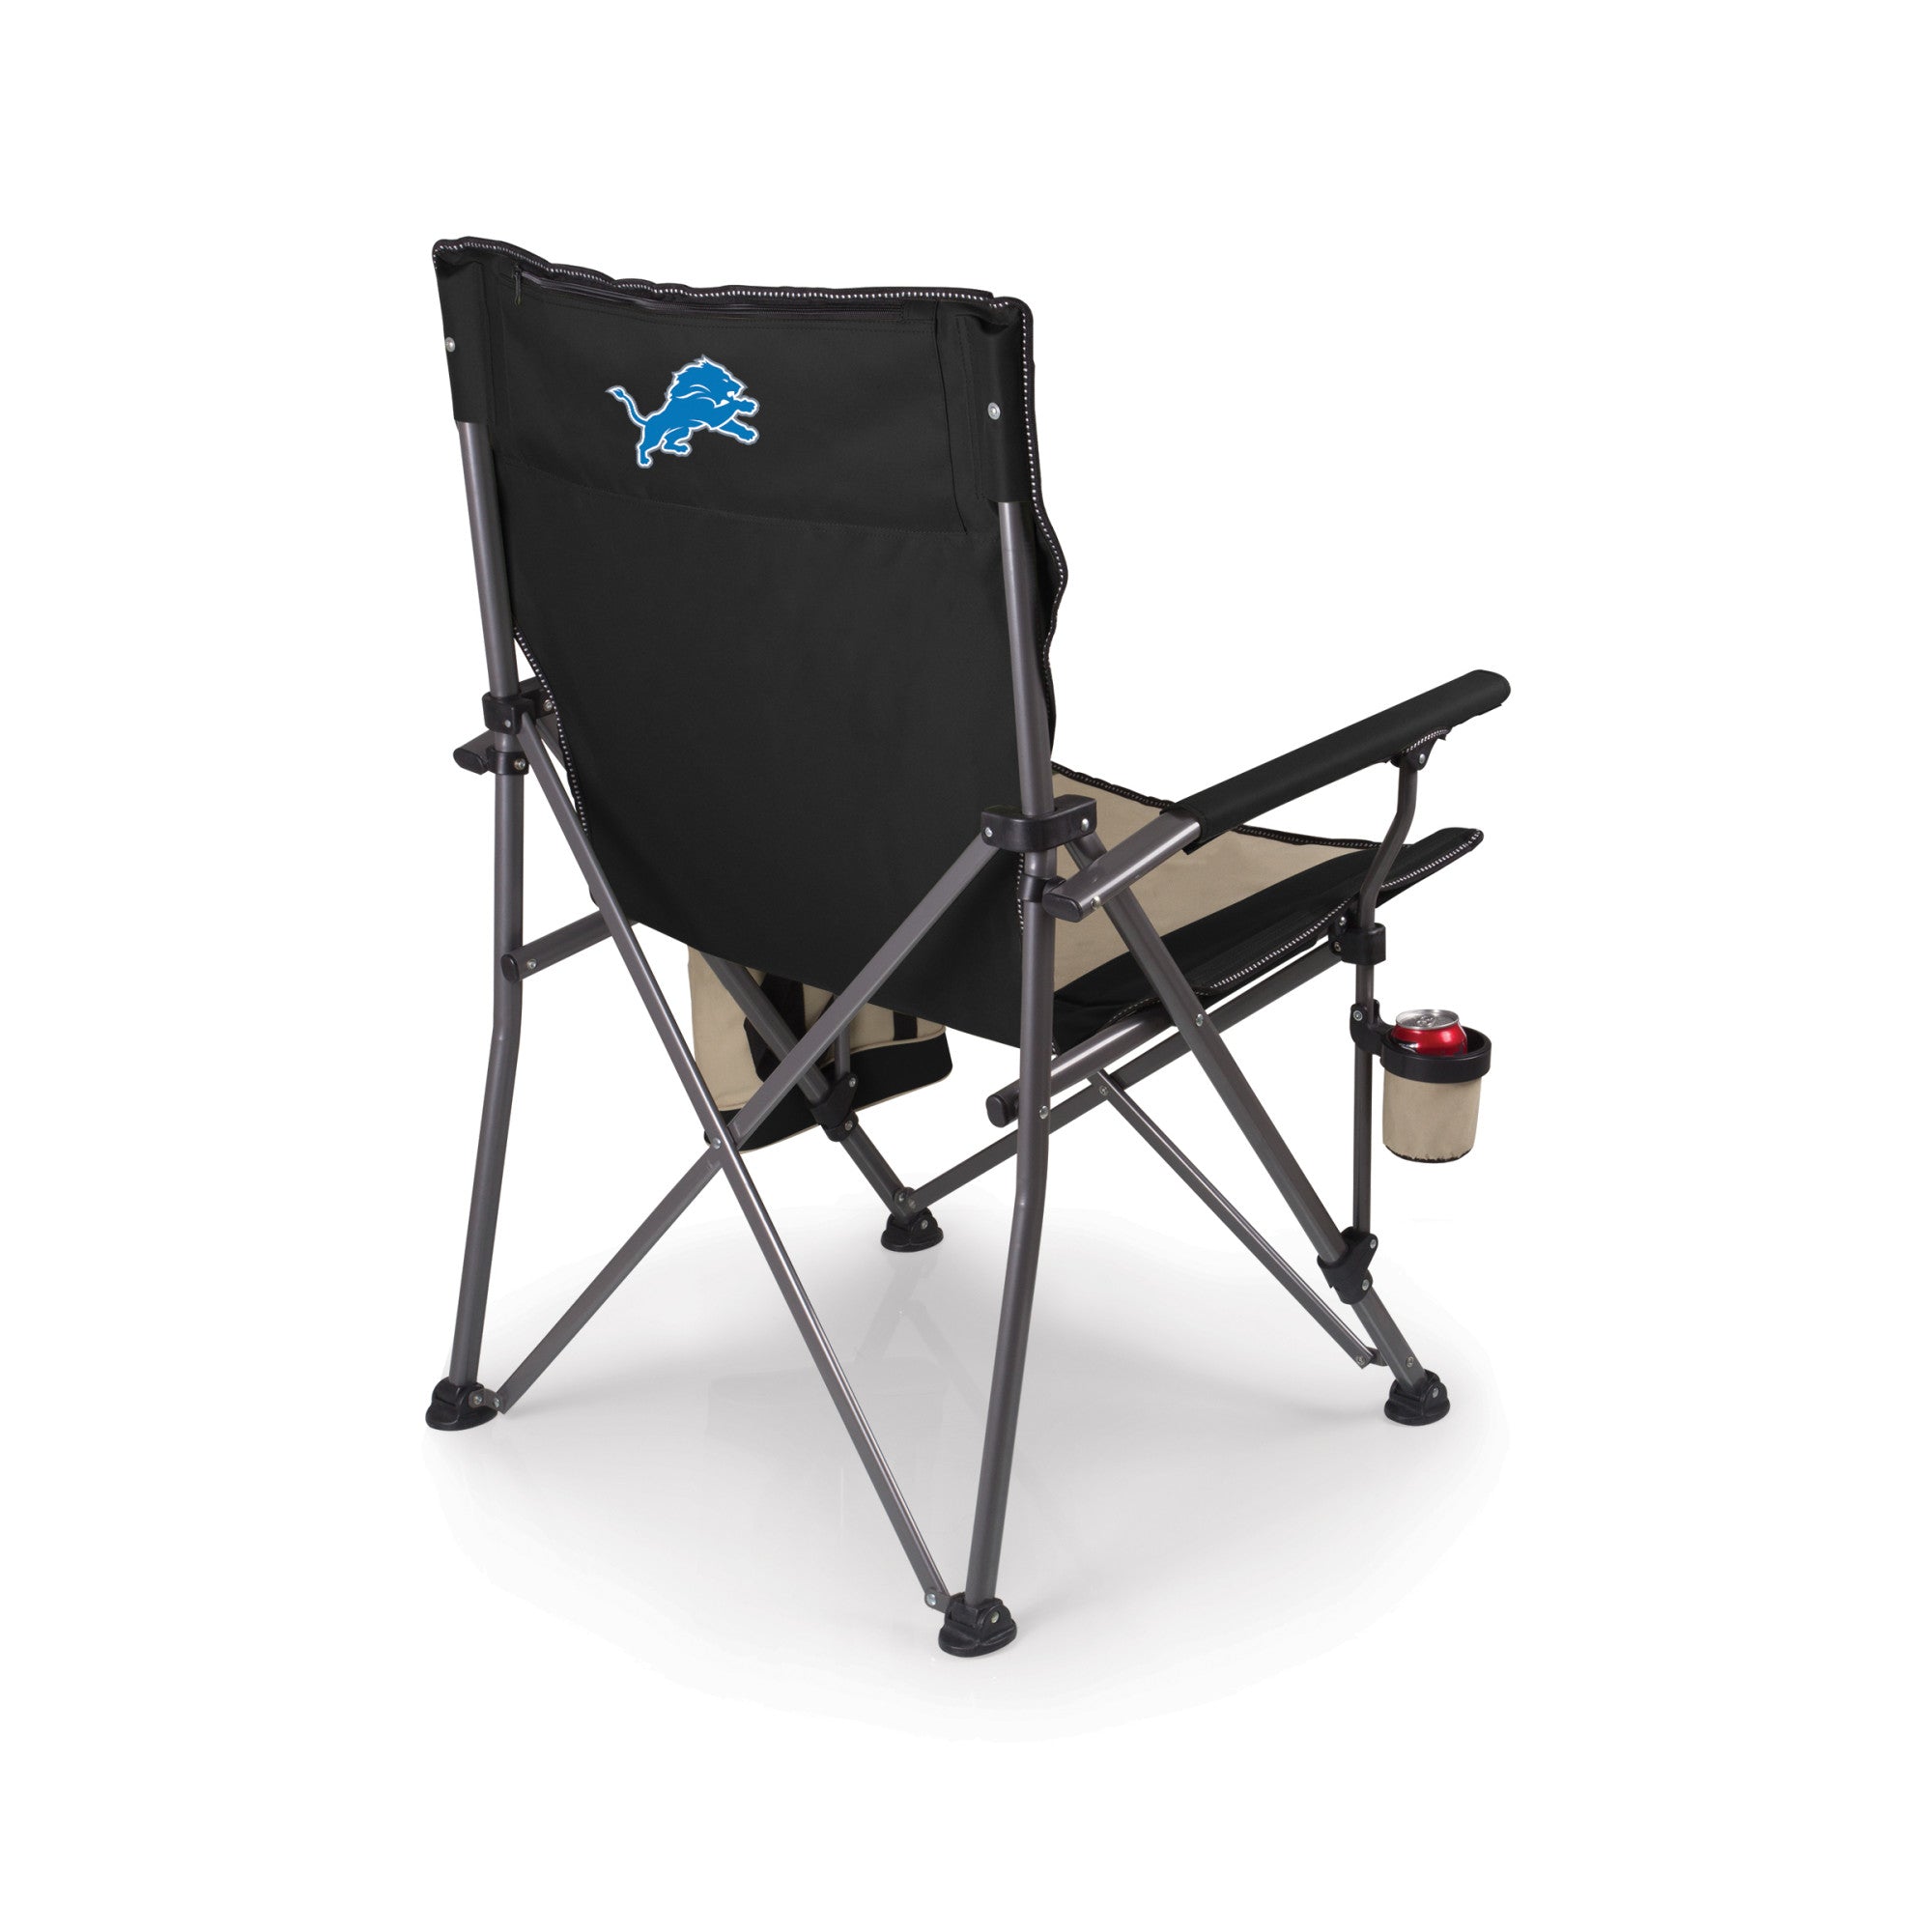 Detroit Lions - Big Bear XL Camp Chair with Cooler – PICNIC TIME